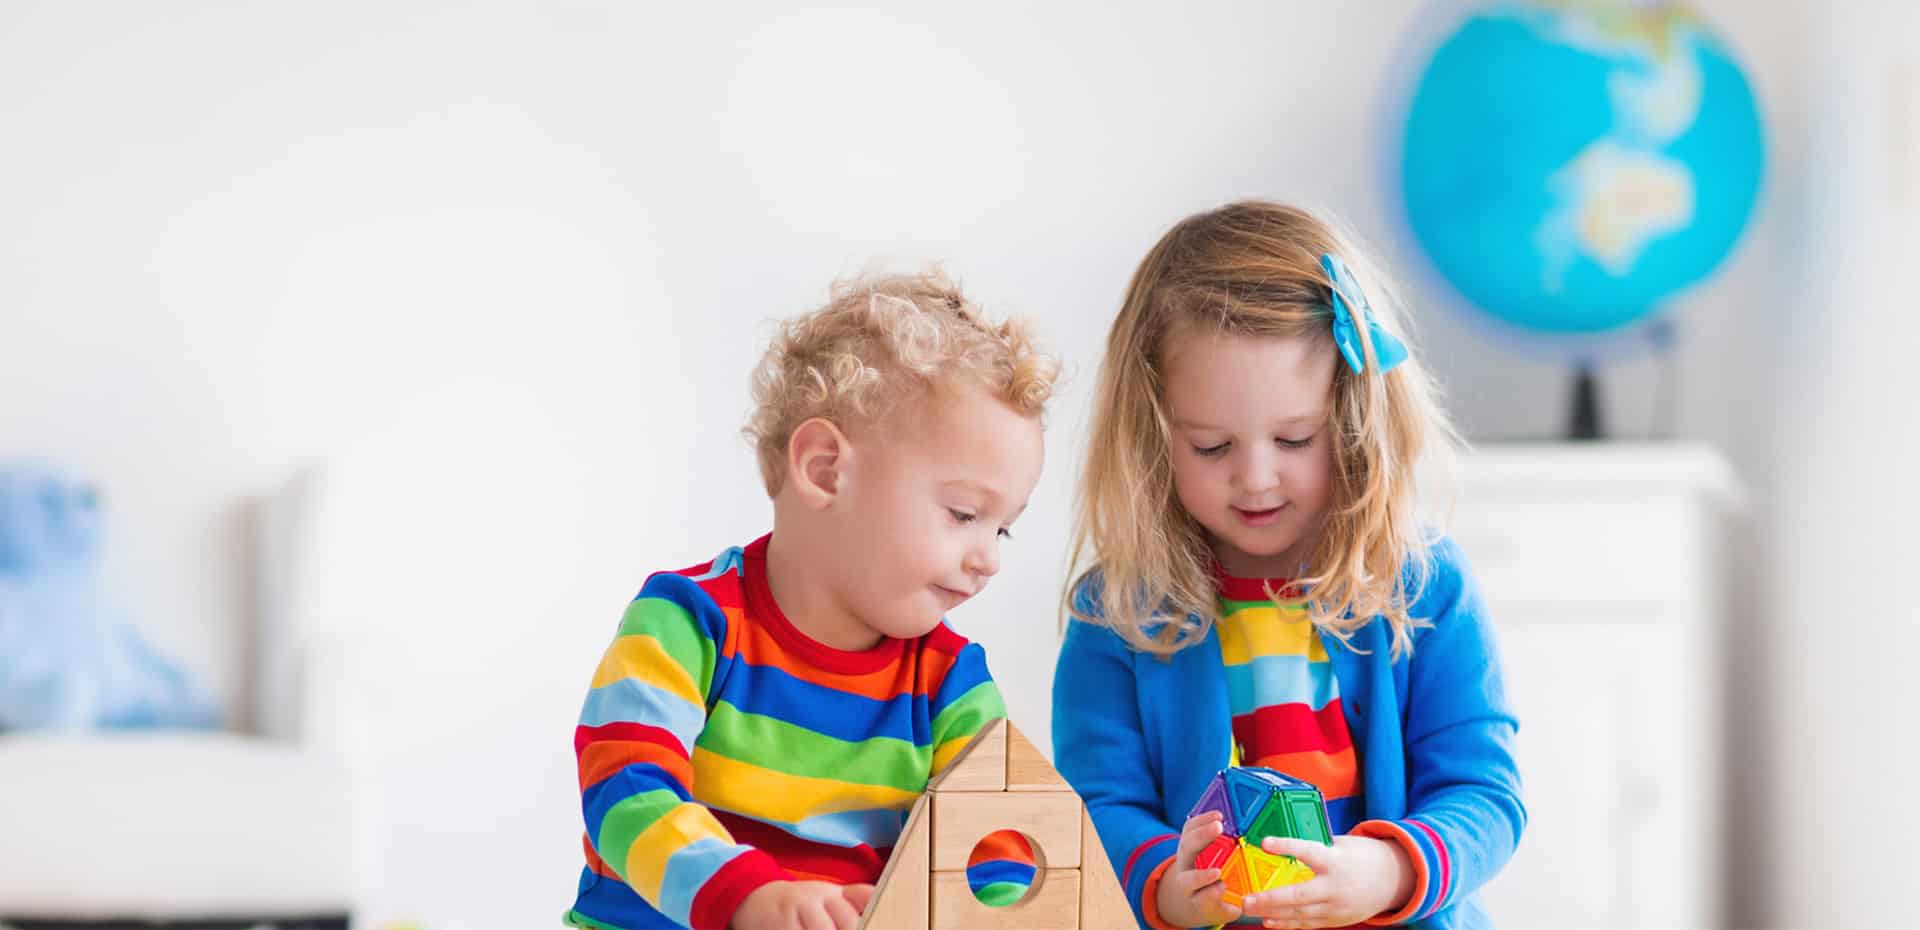 brother and sister playing with building sets and blocks including natural wooden blocks and colorful magnetic blocks